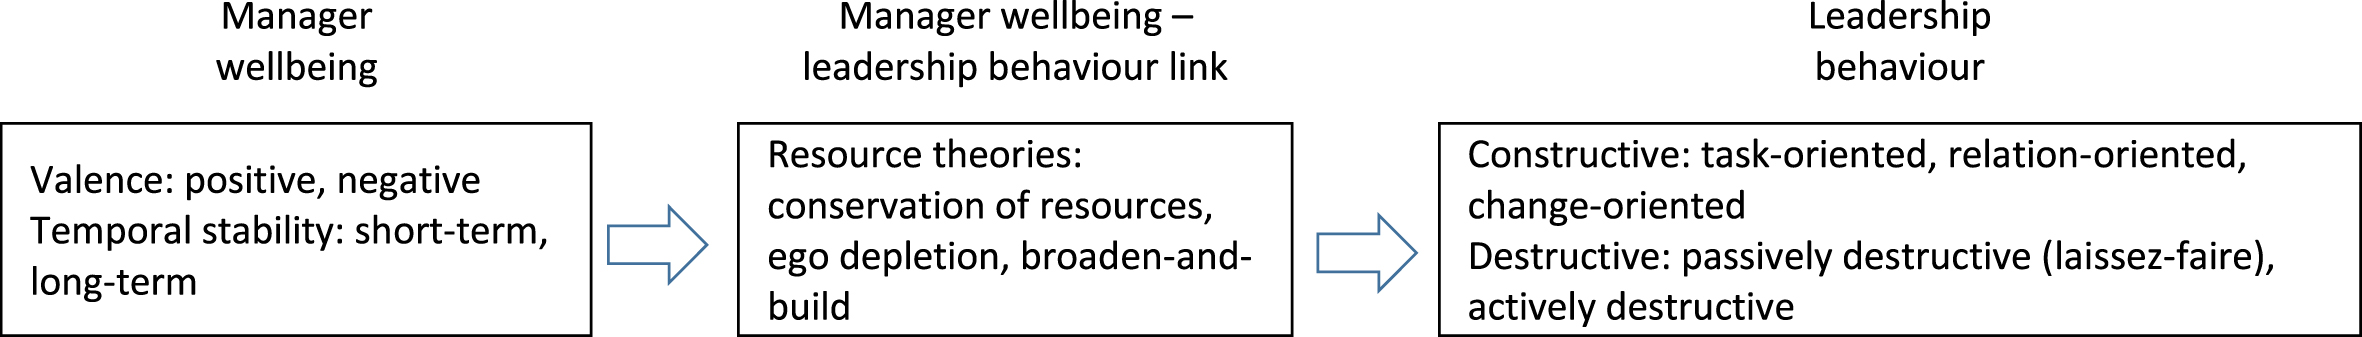 Framework of the link from manager wellbeing to leadership behaviour, after Kaluza et al. [2].